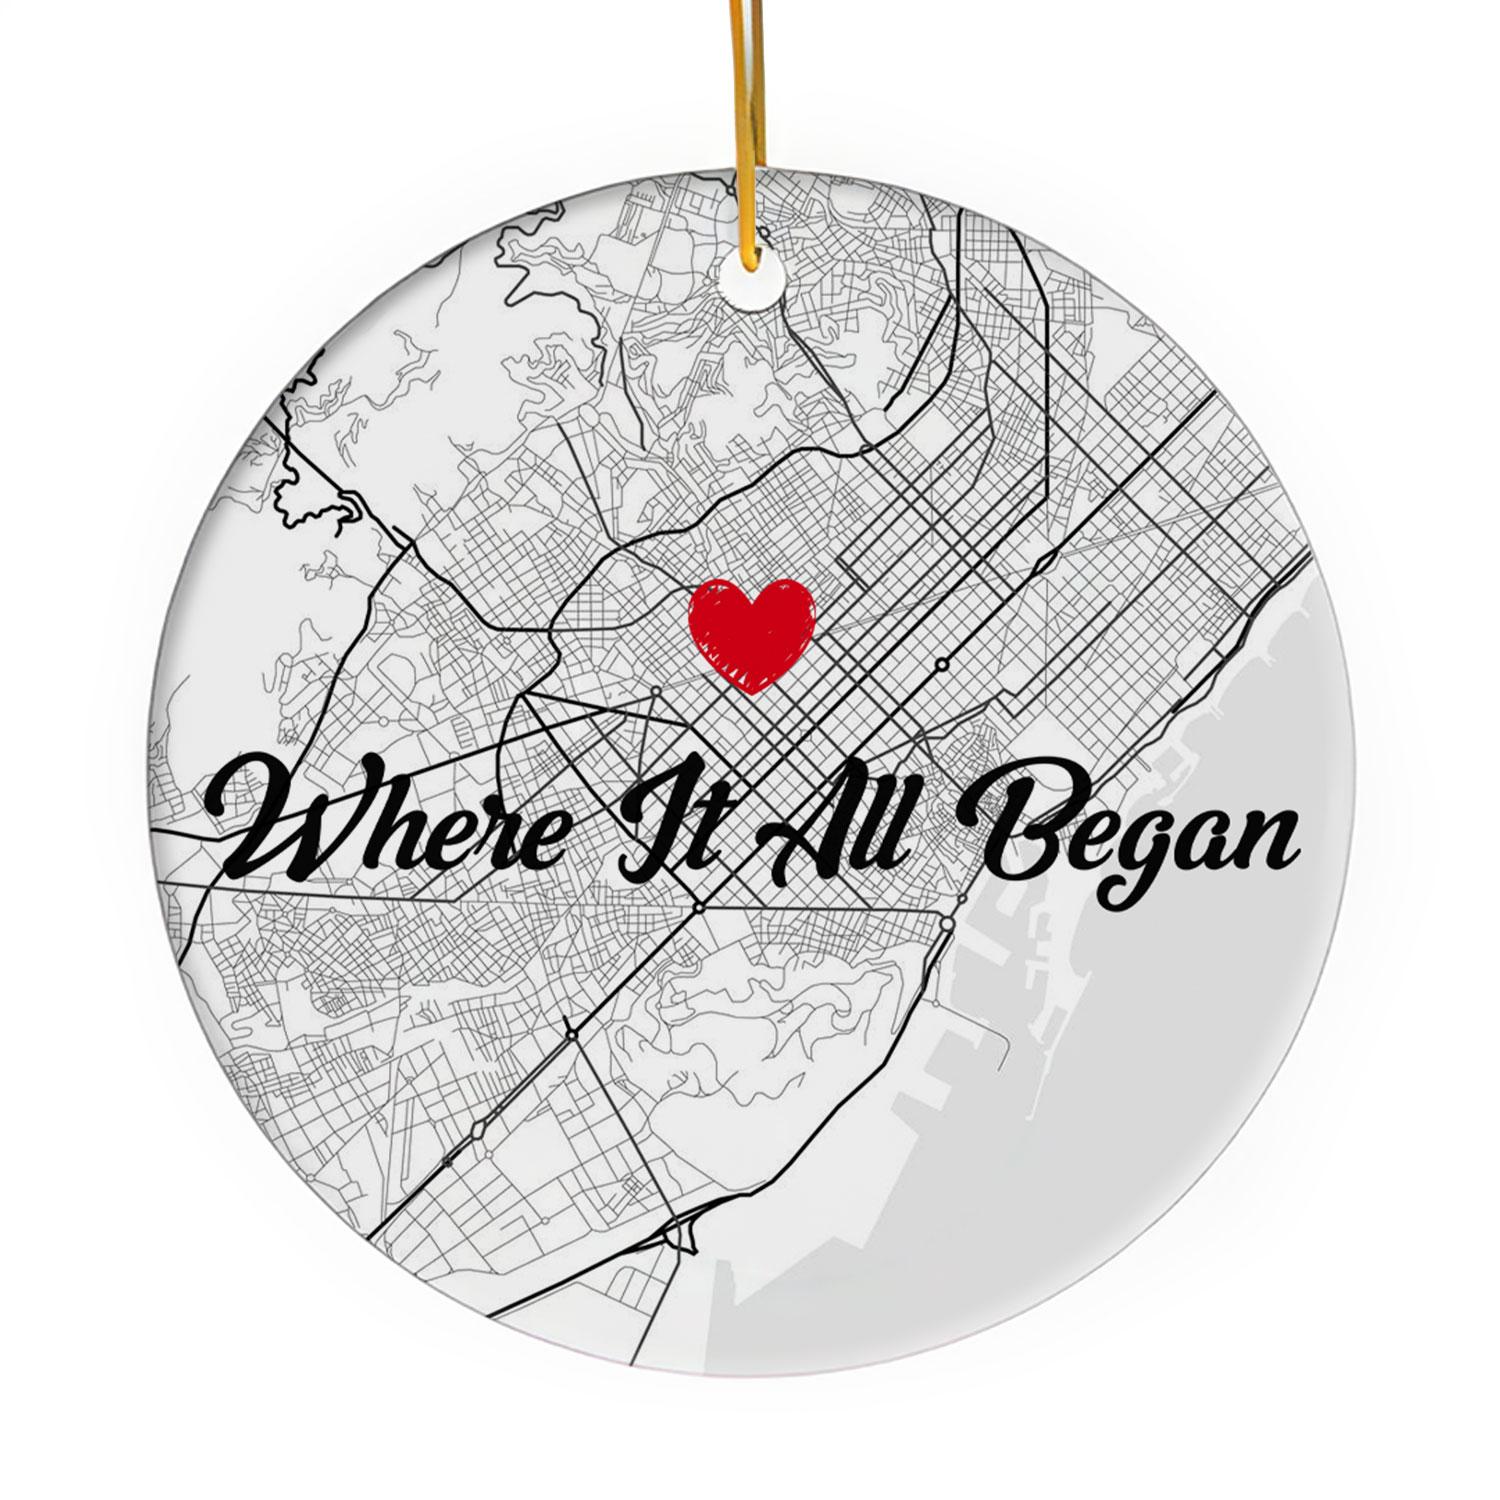 Where It All Began Wall Art Retro - Personalized Anniversary or Valentine's Day gift for Husband or Wife - Custom Circle Ceramic Ornament - MyMindfulGifts